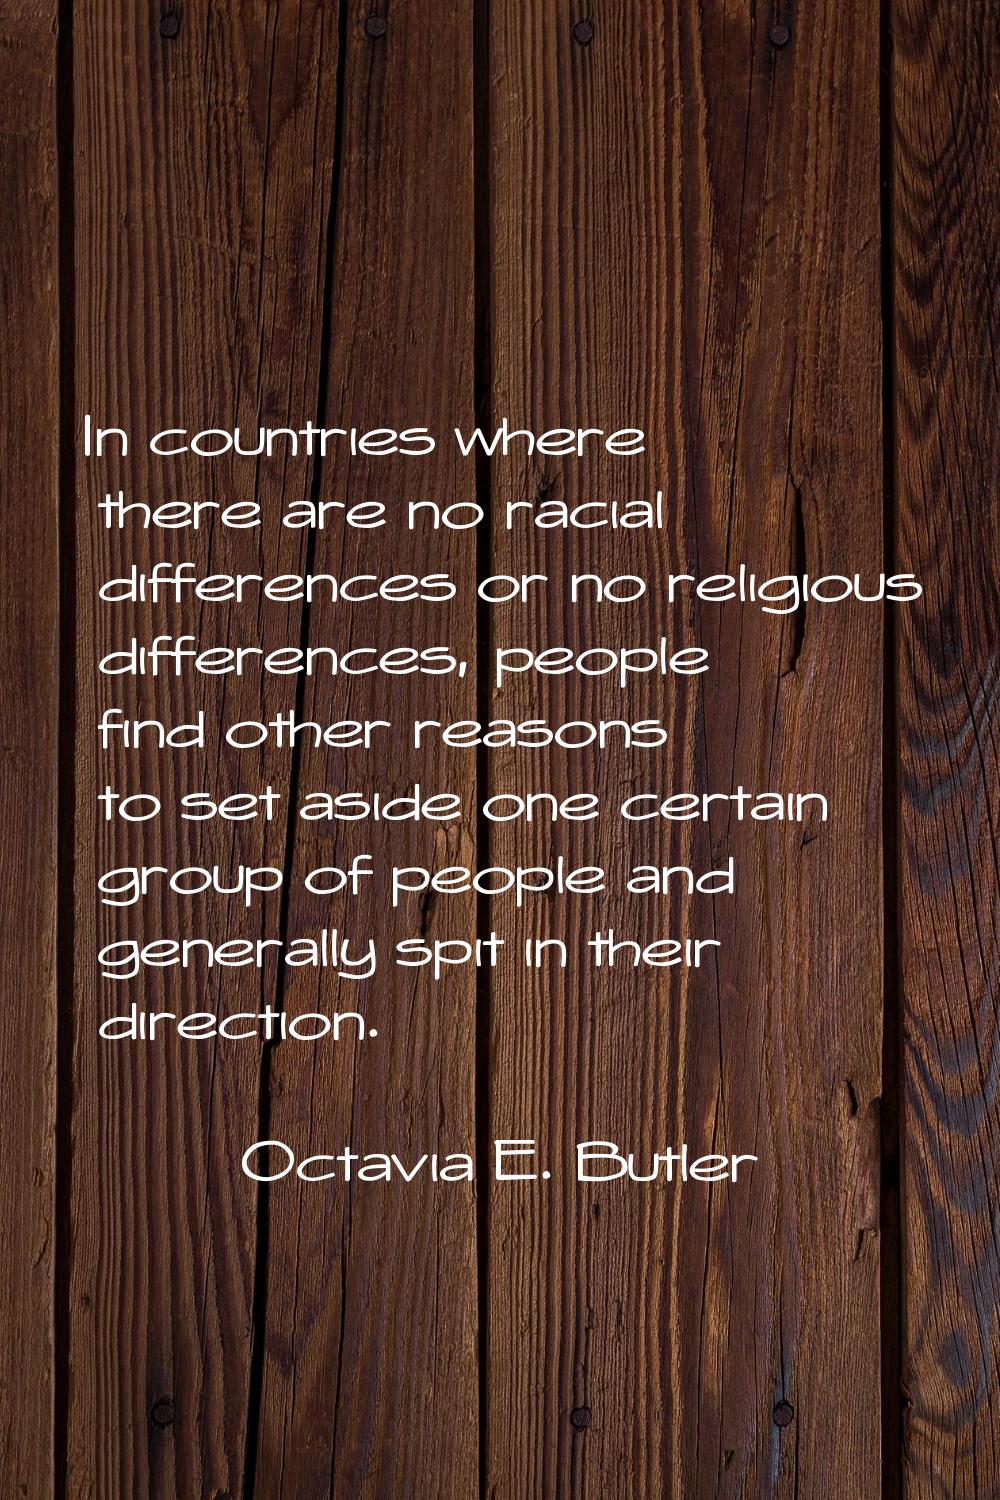 In countries where there are no racial differences or no religious differences, people find other r